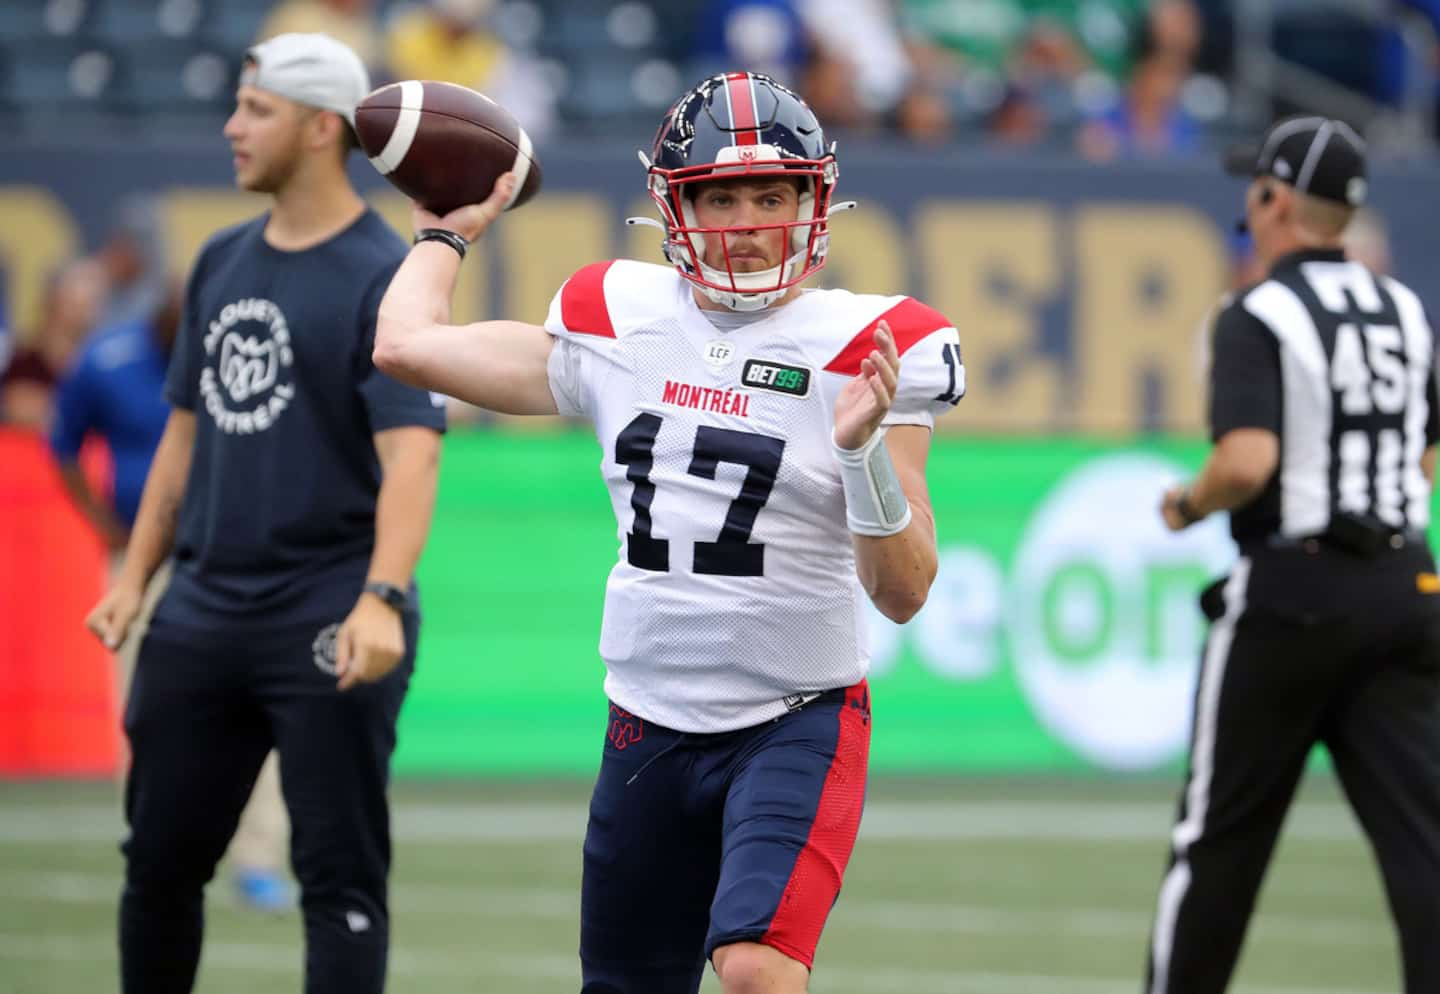 Alouettes: the substitutes are having a great time